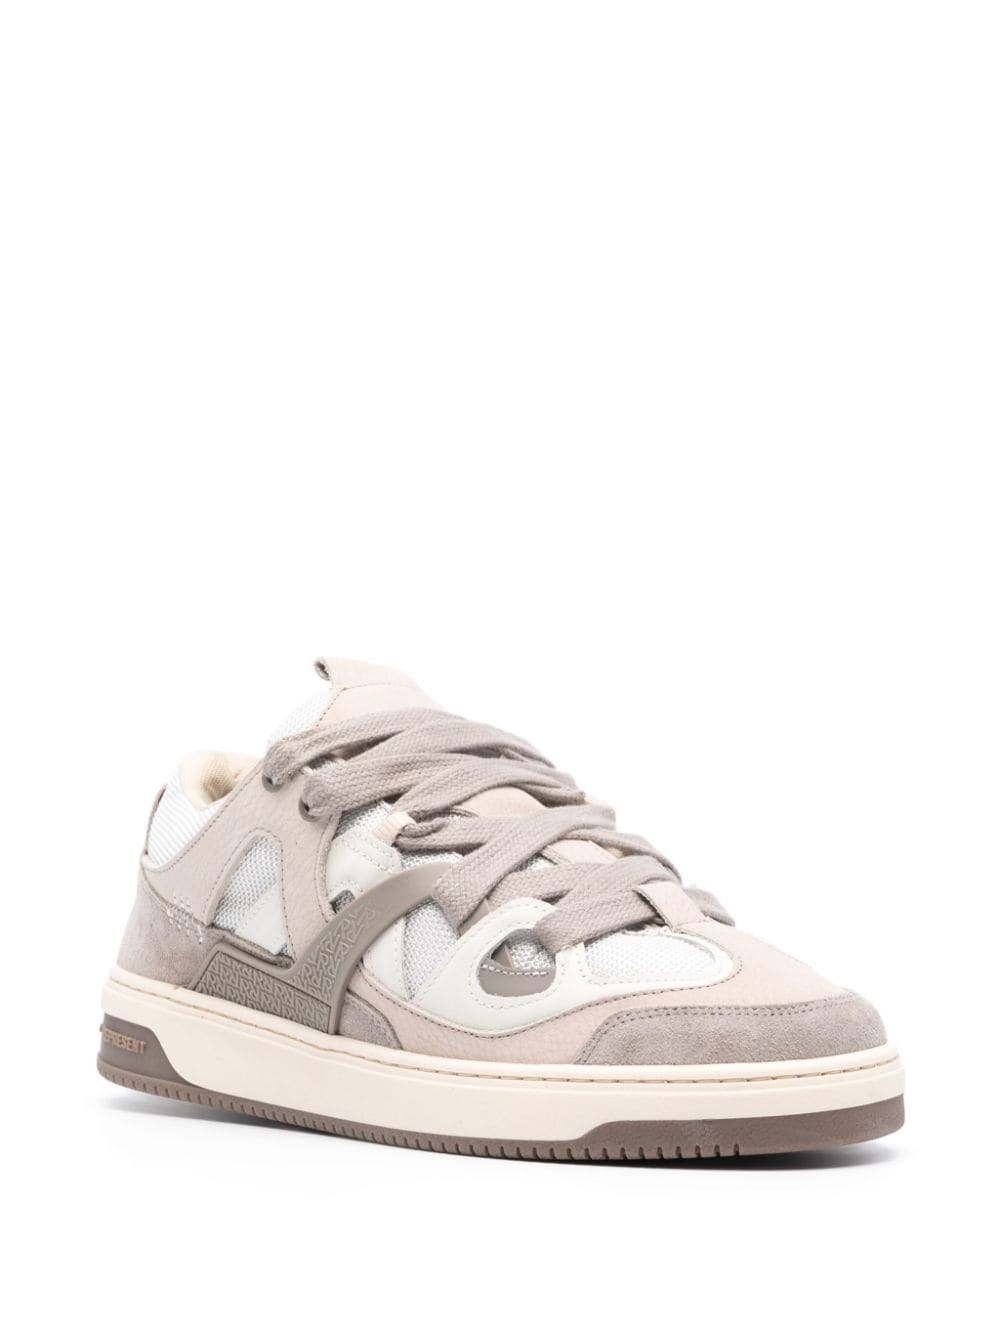 Image 2 of Represent Bully leather sneakers